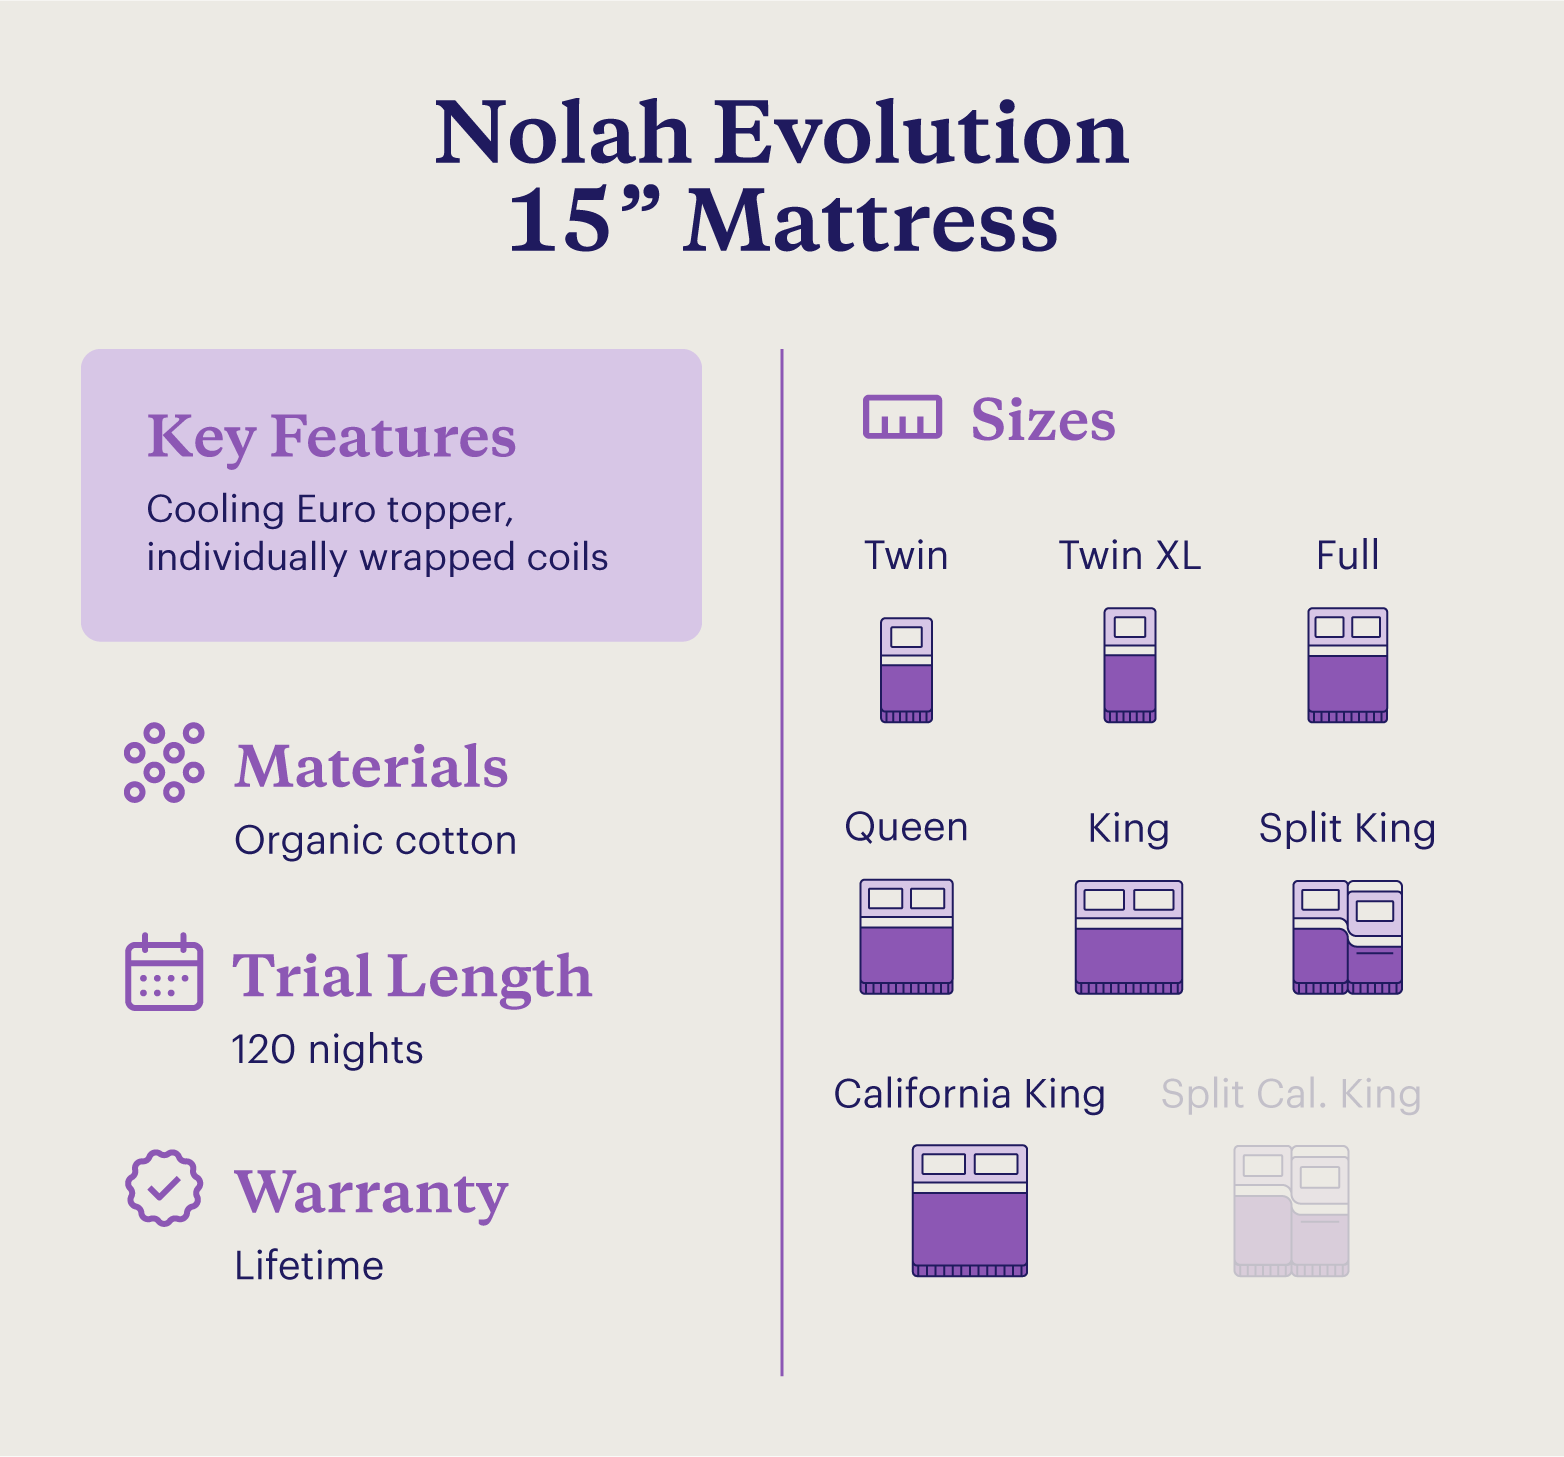 A chart showing information about the Nolah Evolution 15” Mattress. 